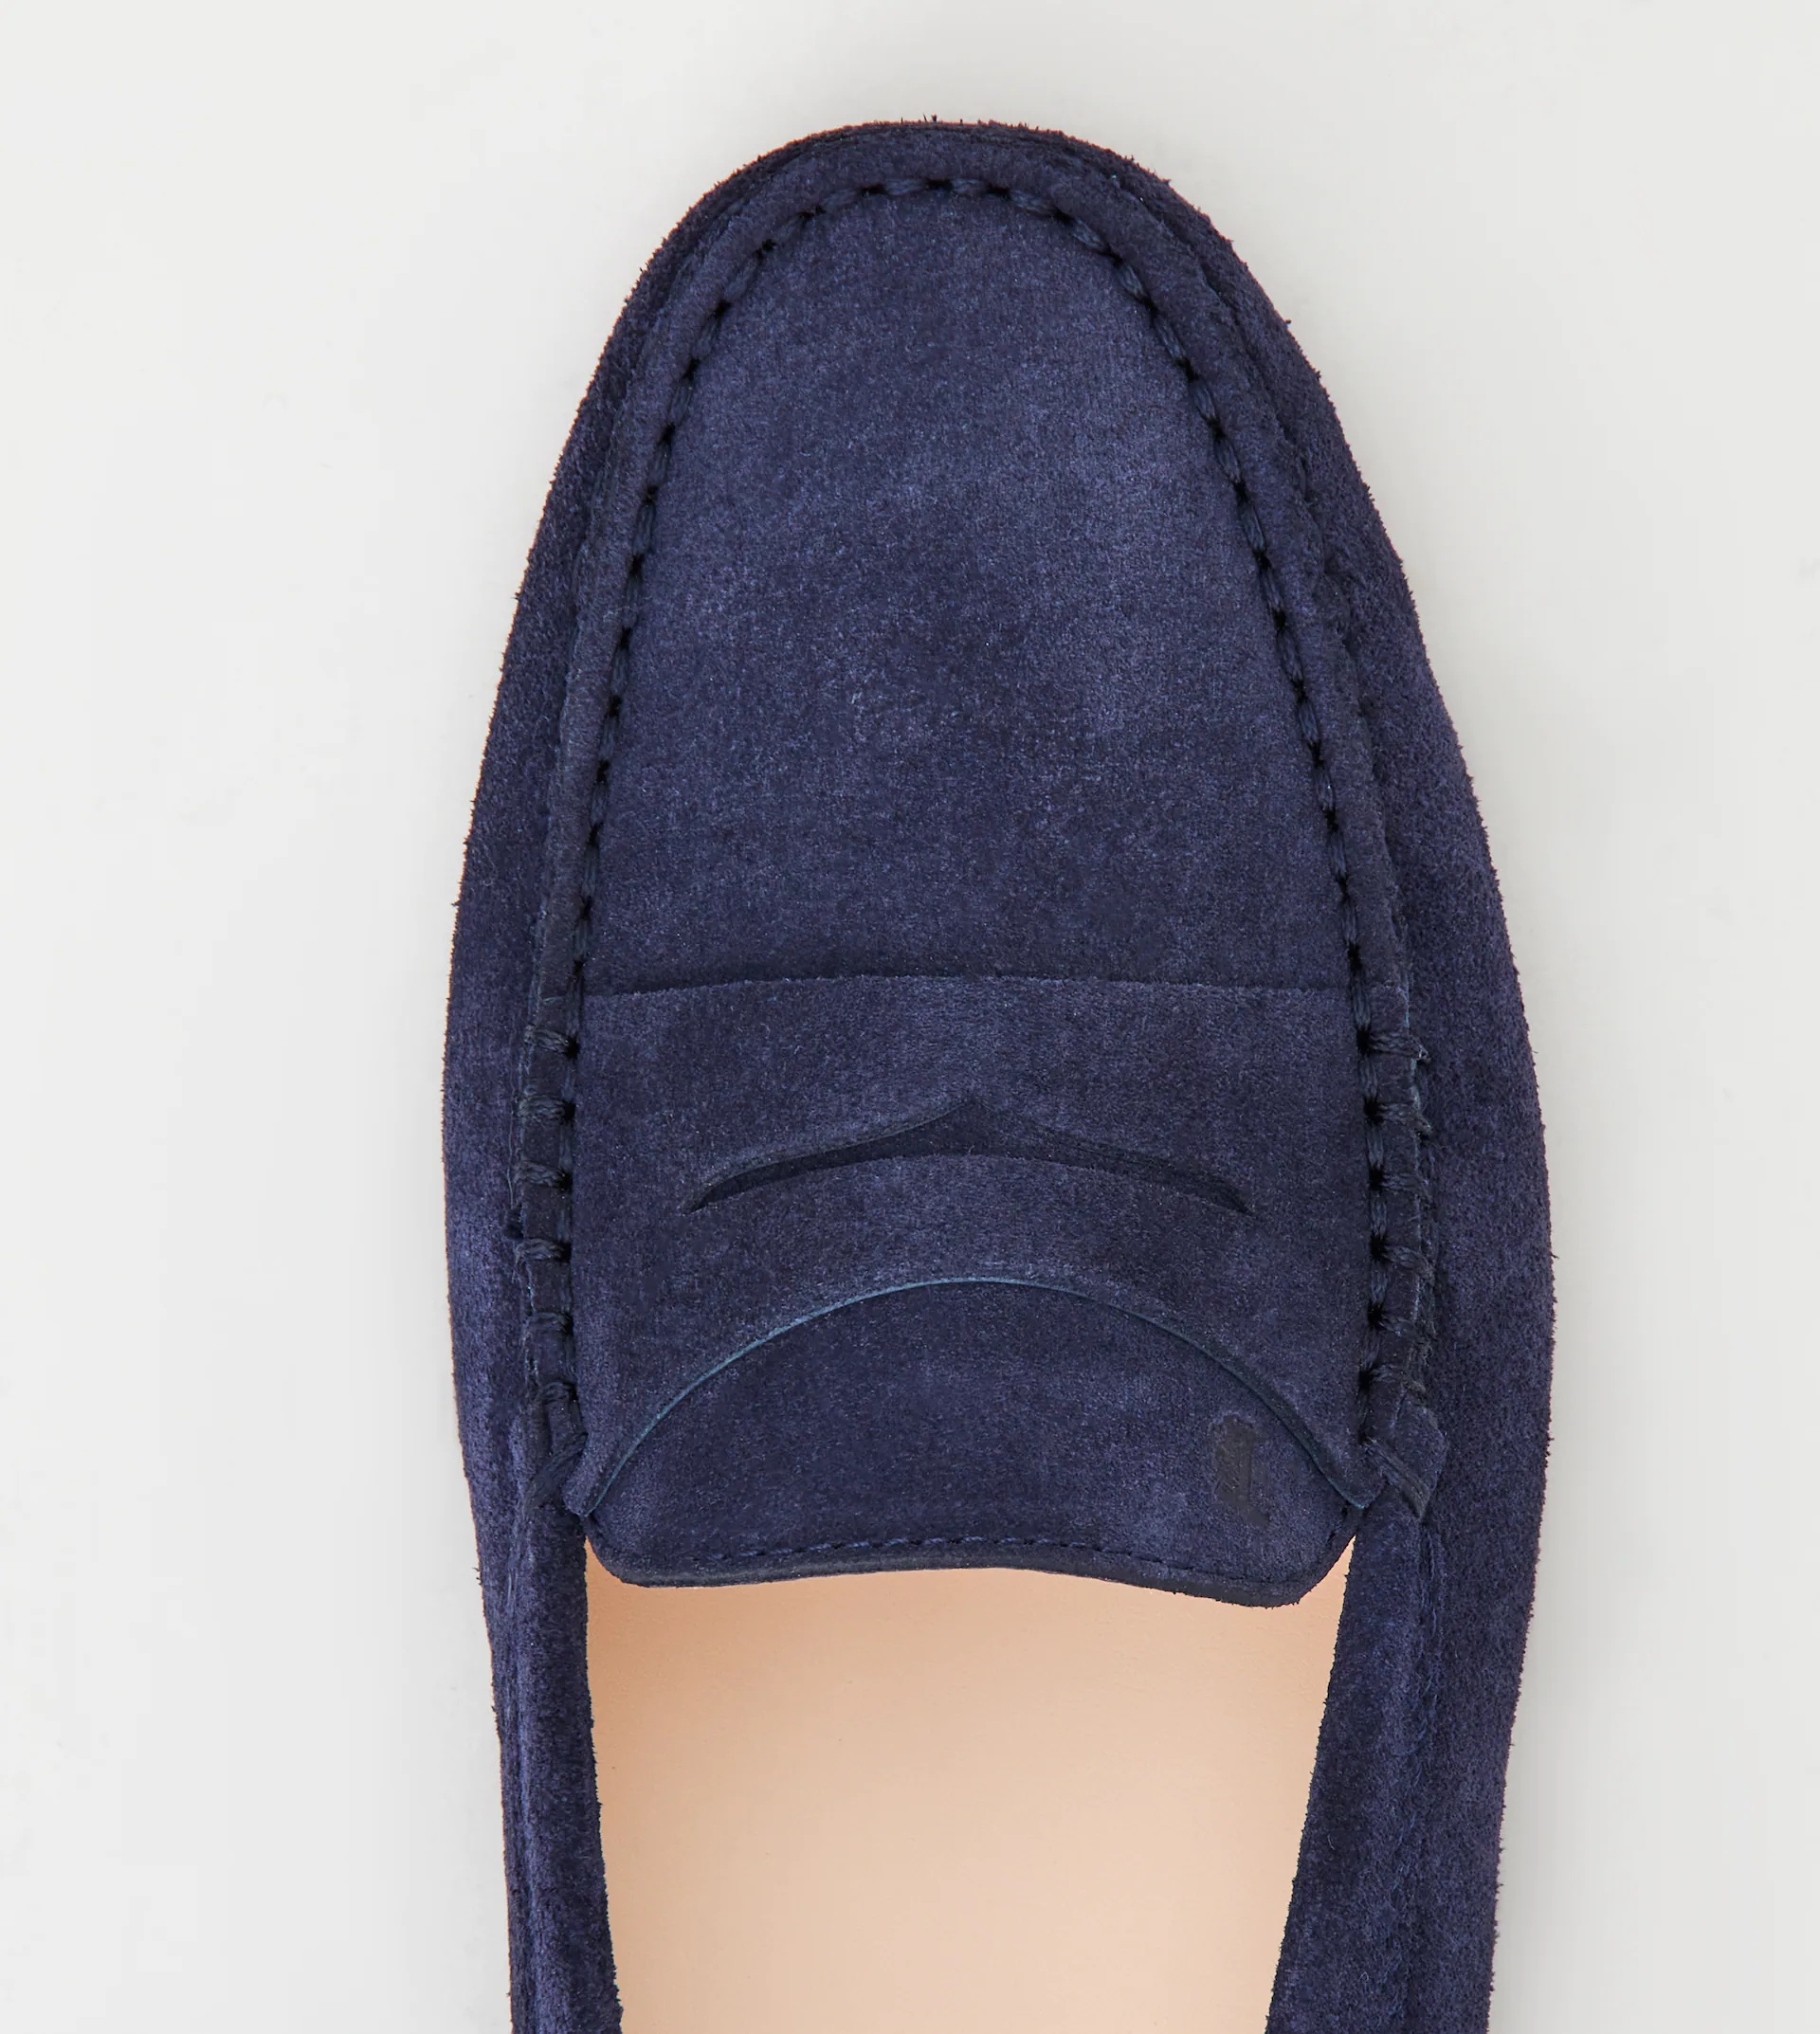 GOMMINO DRIVING SHOES IN SUEDE - BLUE - 3